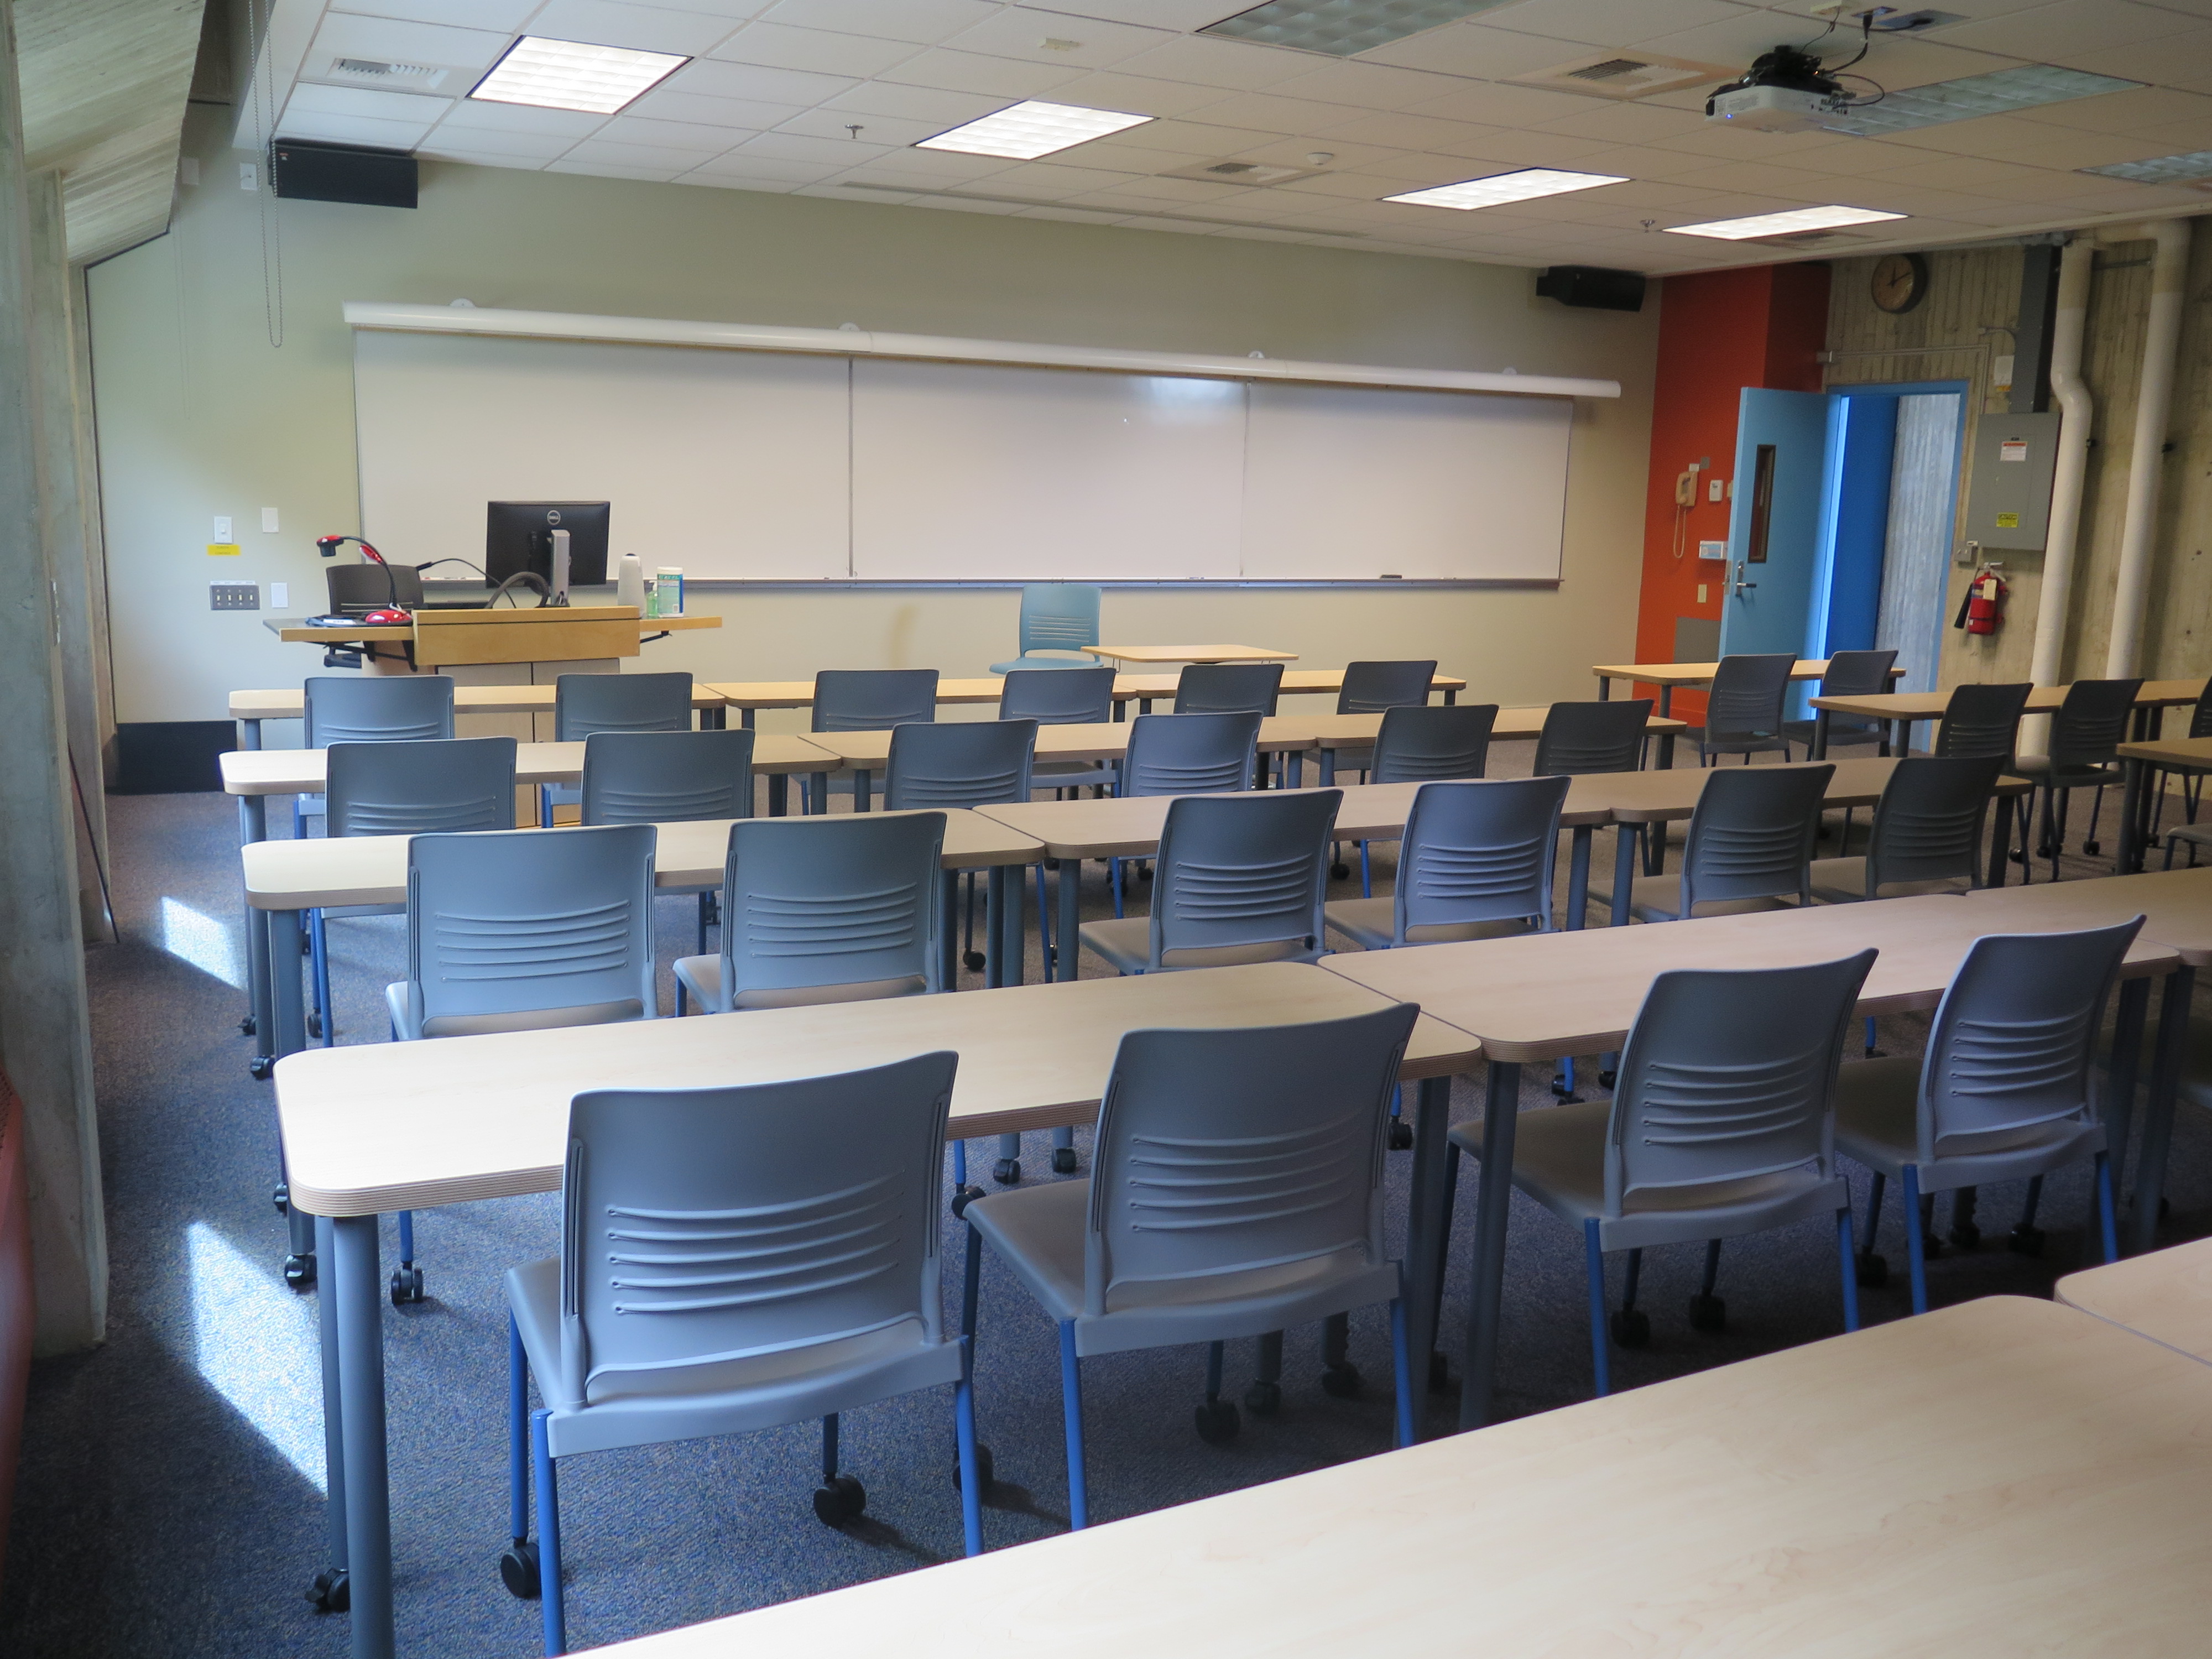 Room consists of carpet, moveable tables and chairs and a podium and whiteboard located at the front of the room. 